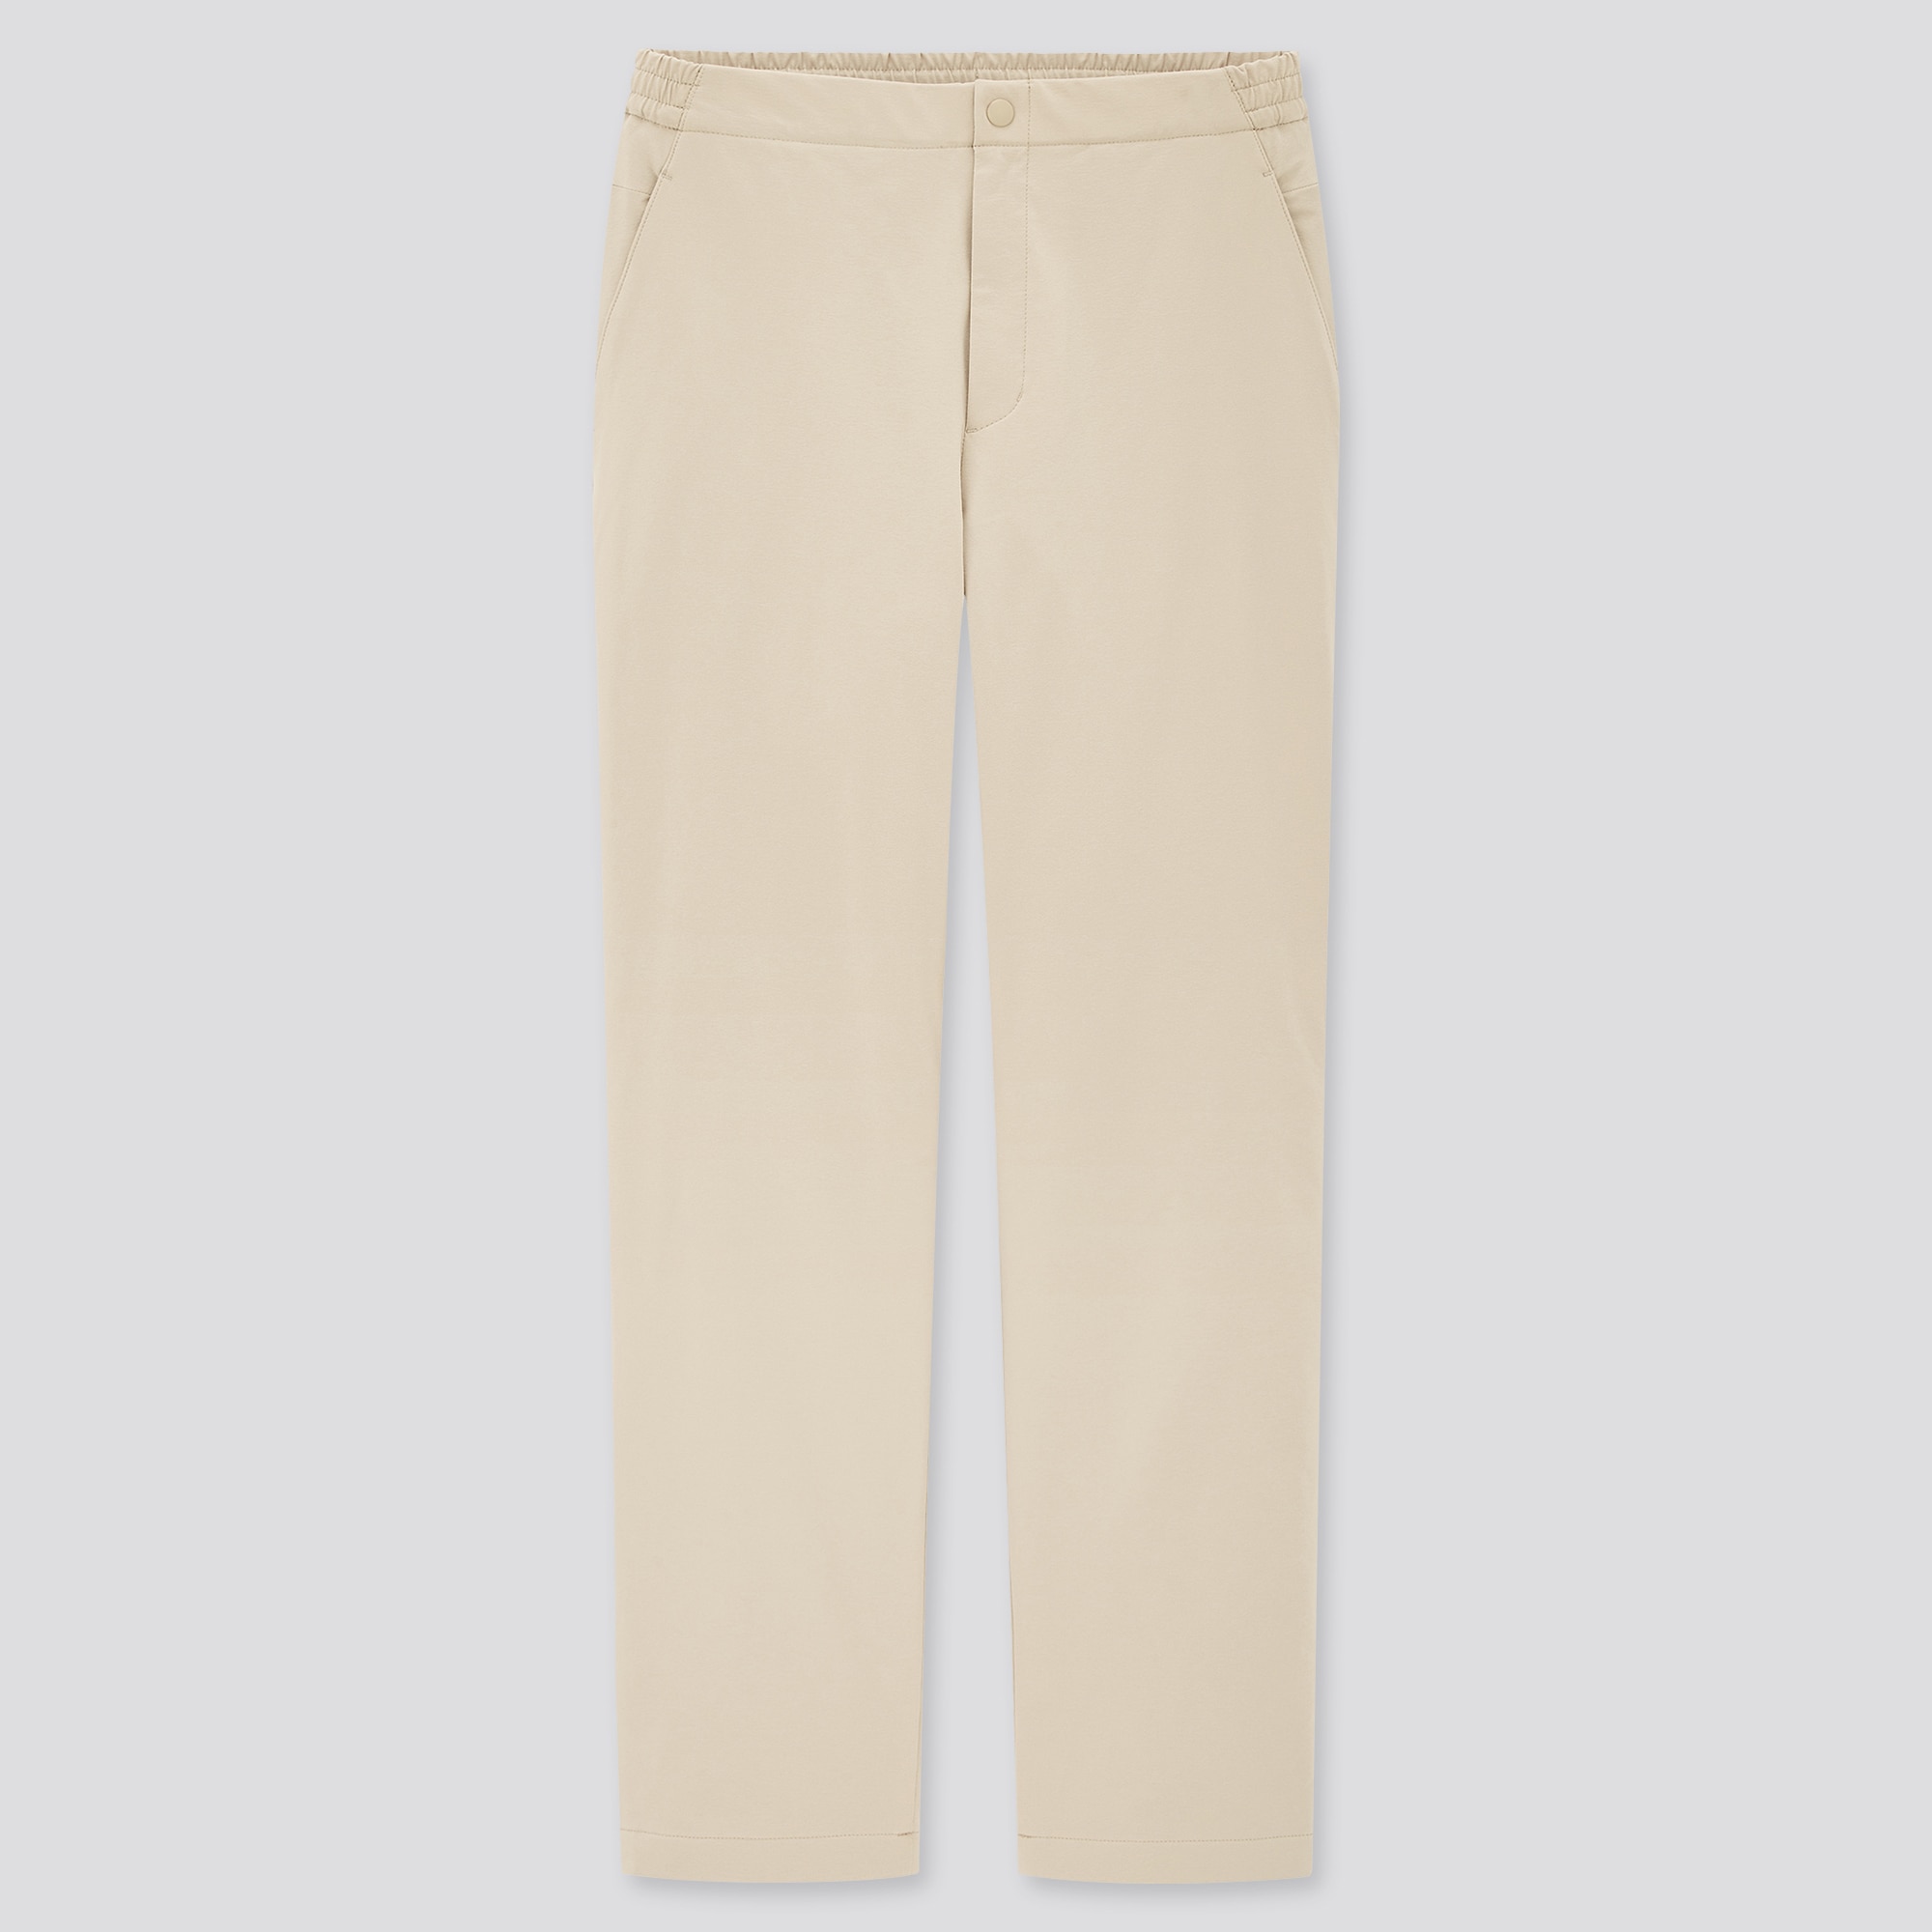 WOMENS COTTON RELAXED ANKLE PANTS  UNIQLO SG